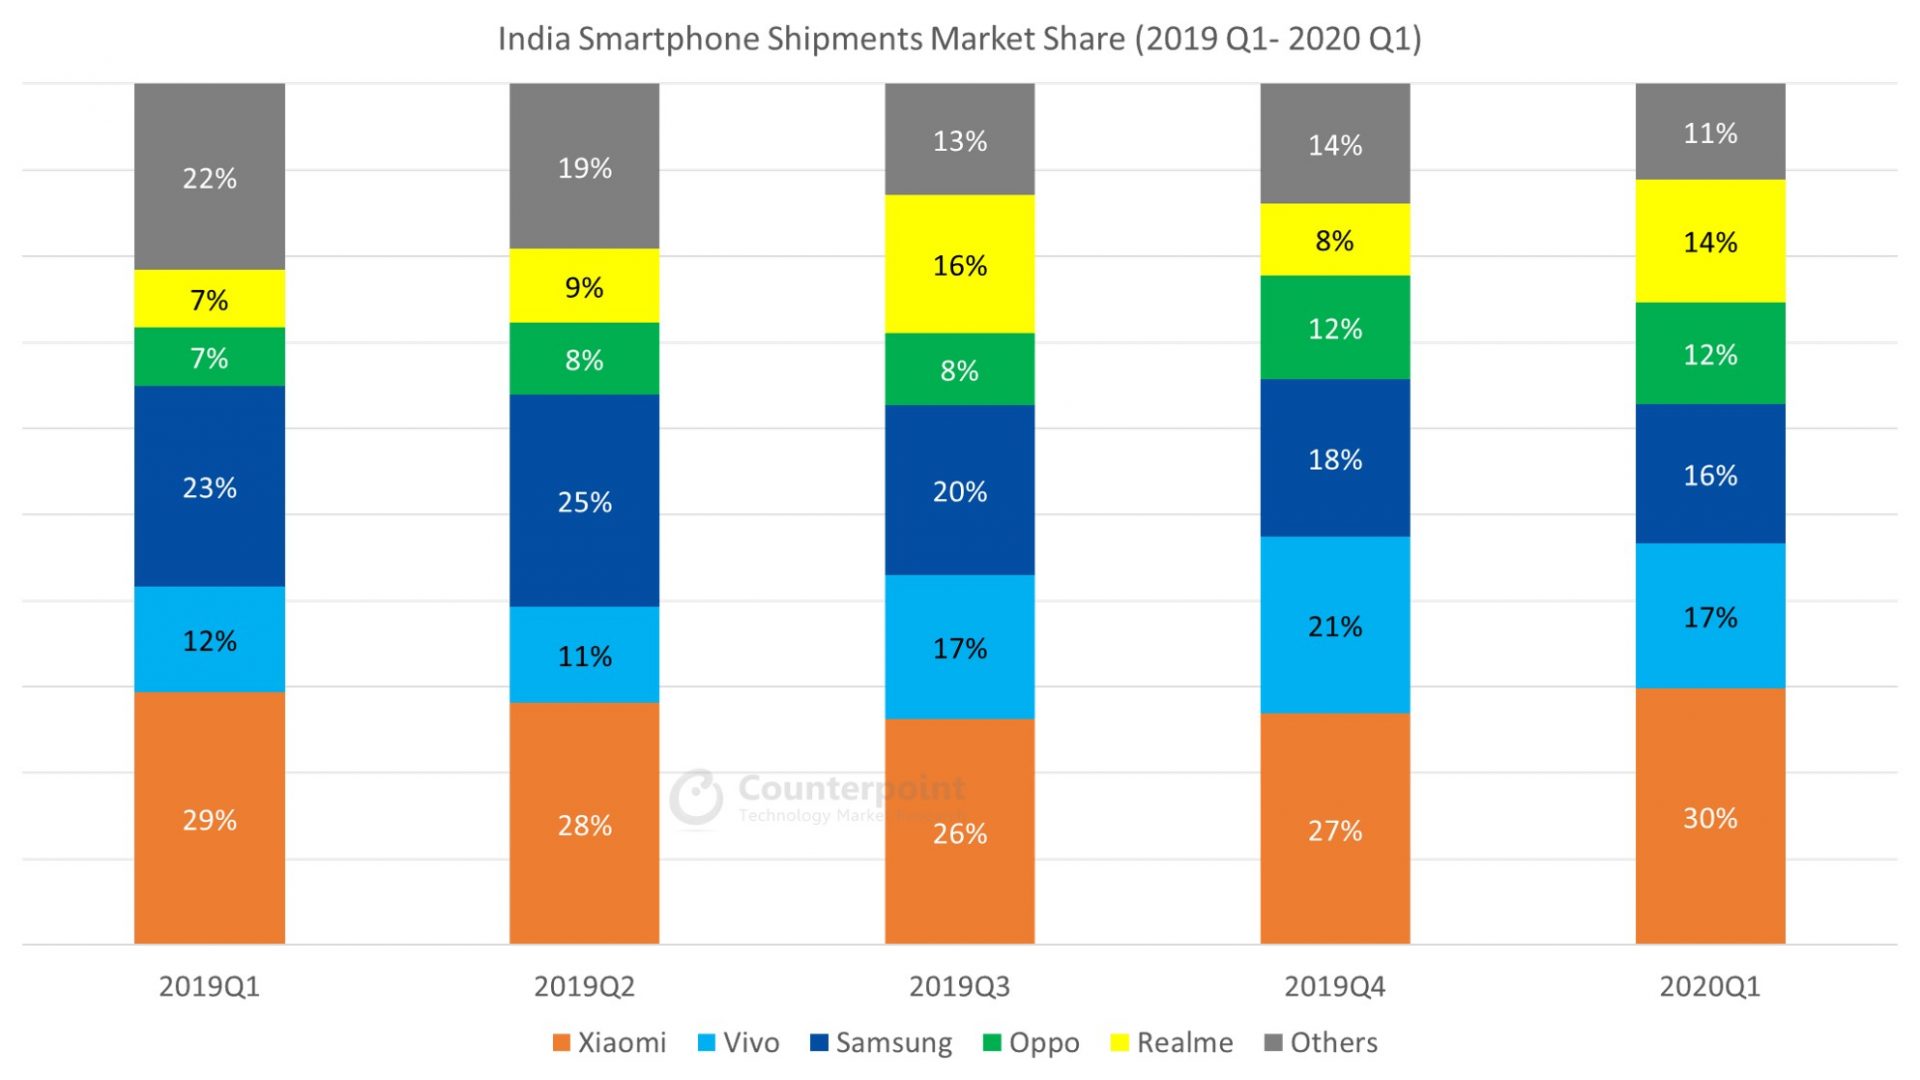 Counterpoint India Smartphone Shipments Market Share Q1 2020